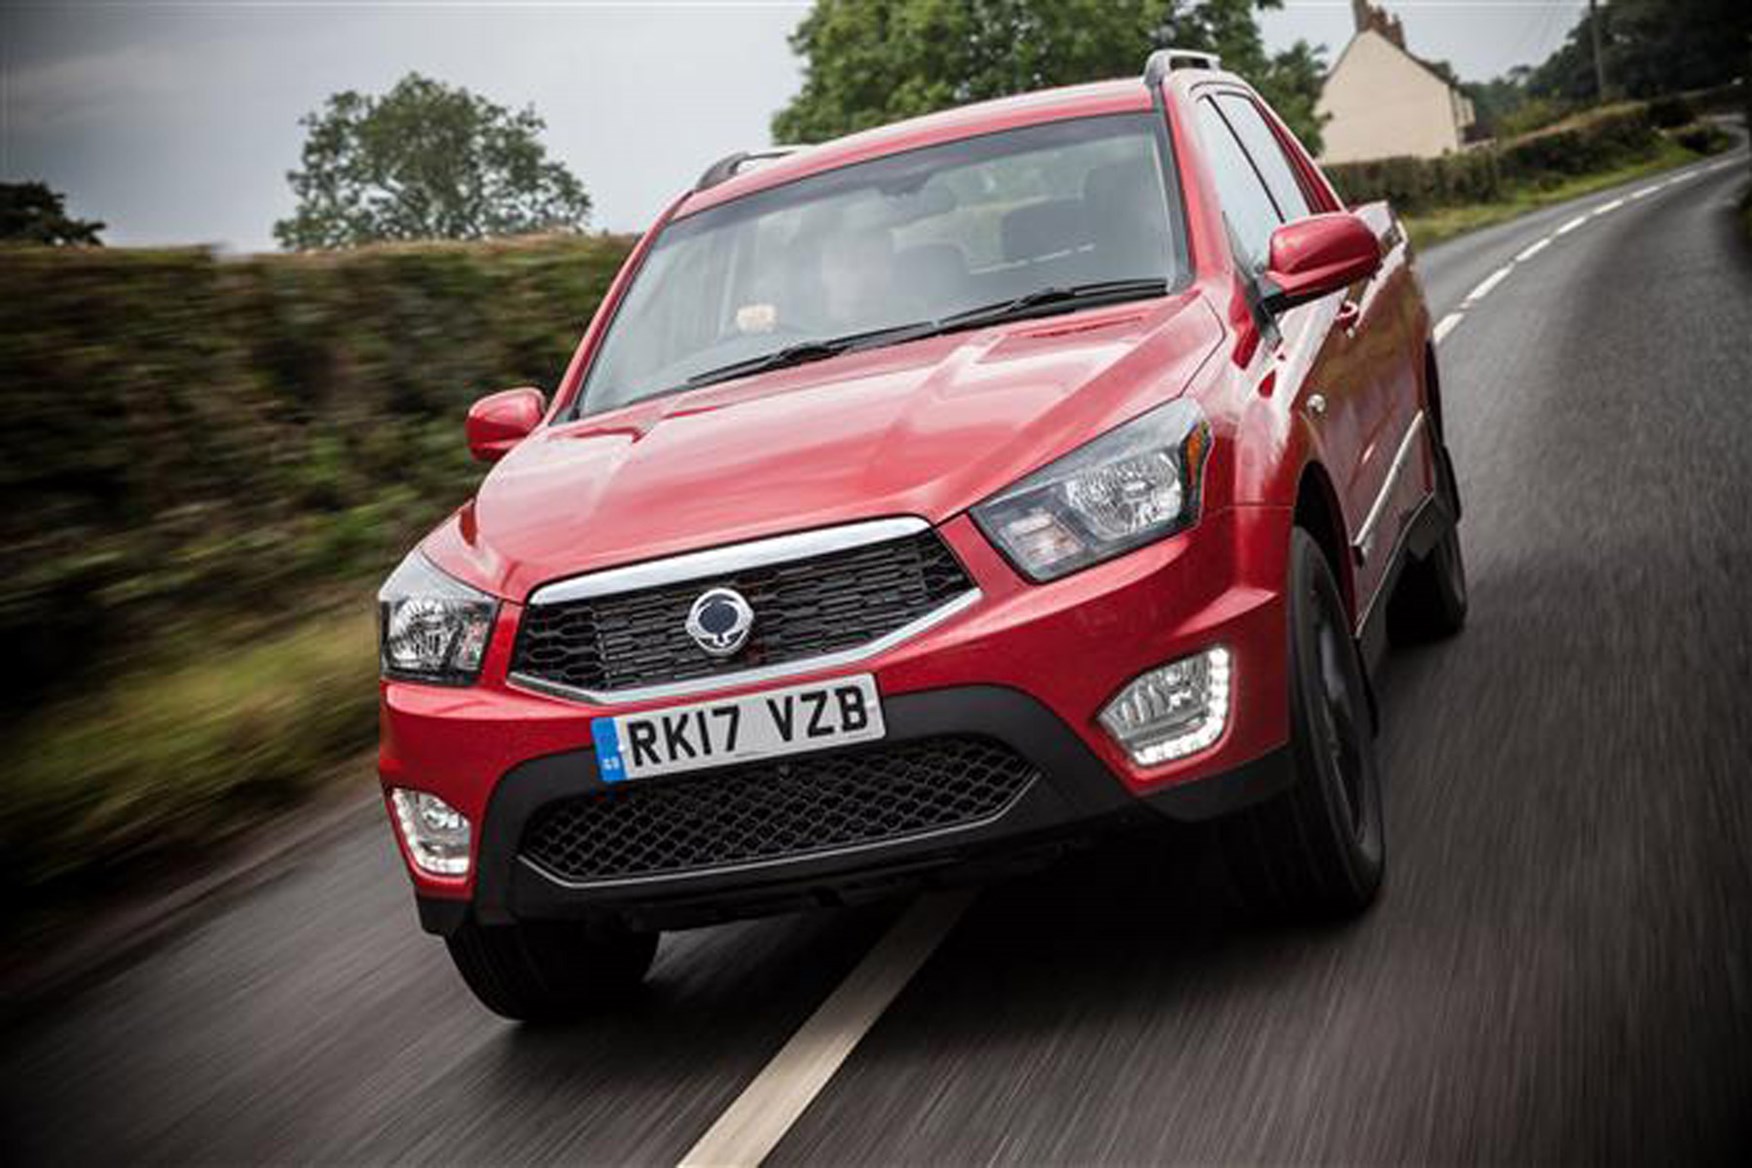 SsangYong Musso full review on Parkers Vans - on the road